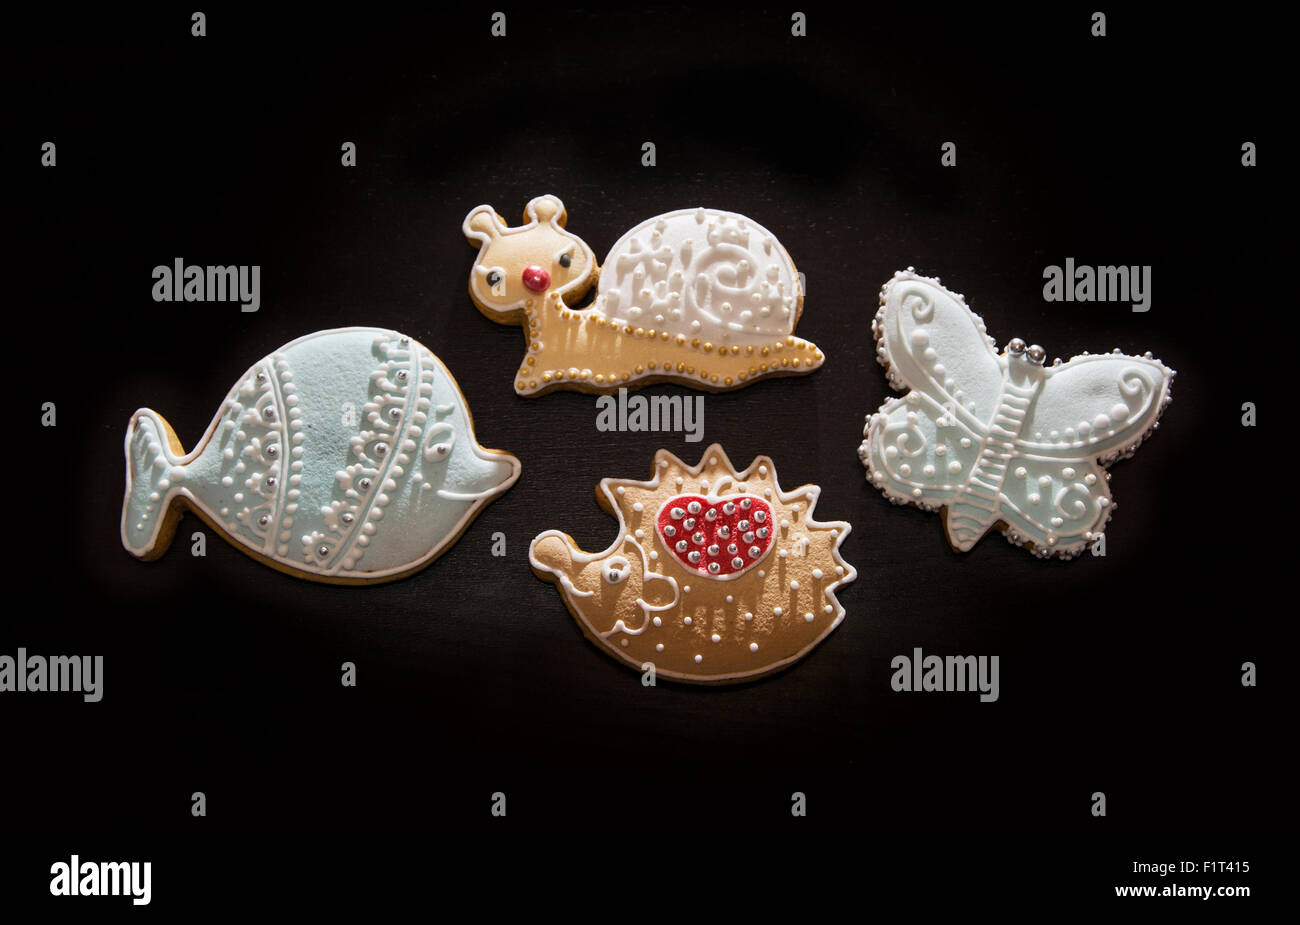 Gingerbread cookies on the dark background. Fish, snail, hedgehog and butterfly. Christmas theme. Stock Photo